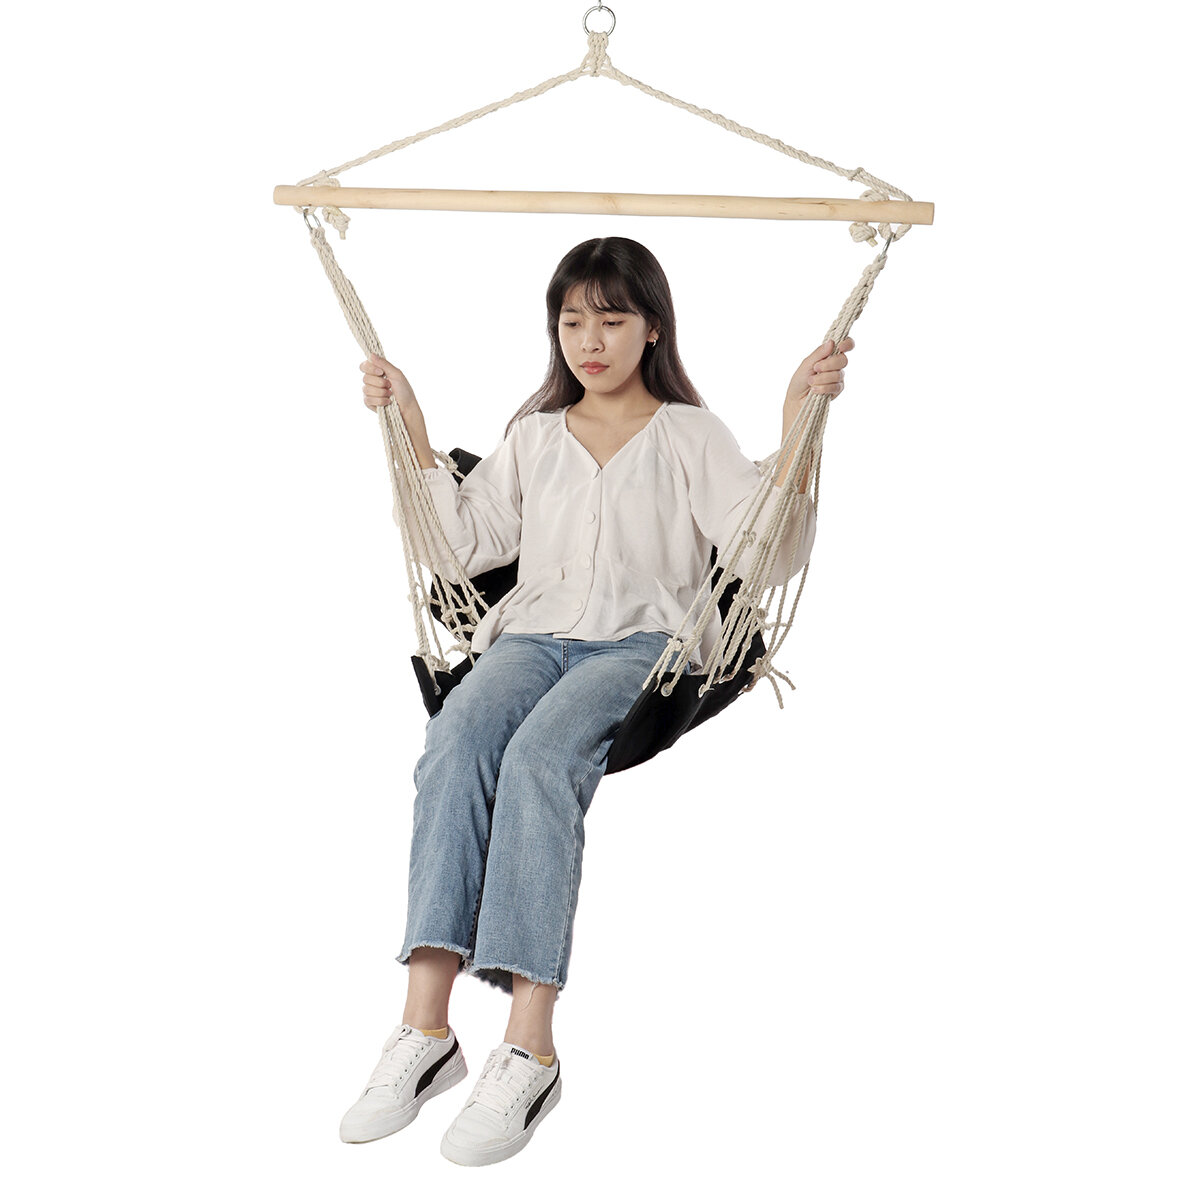 10050cm 160kg Max Load Cotton Hammock Chair Simple Comfortable Hanging Seat Outdoor Garden Swing Max Load 160kg